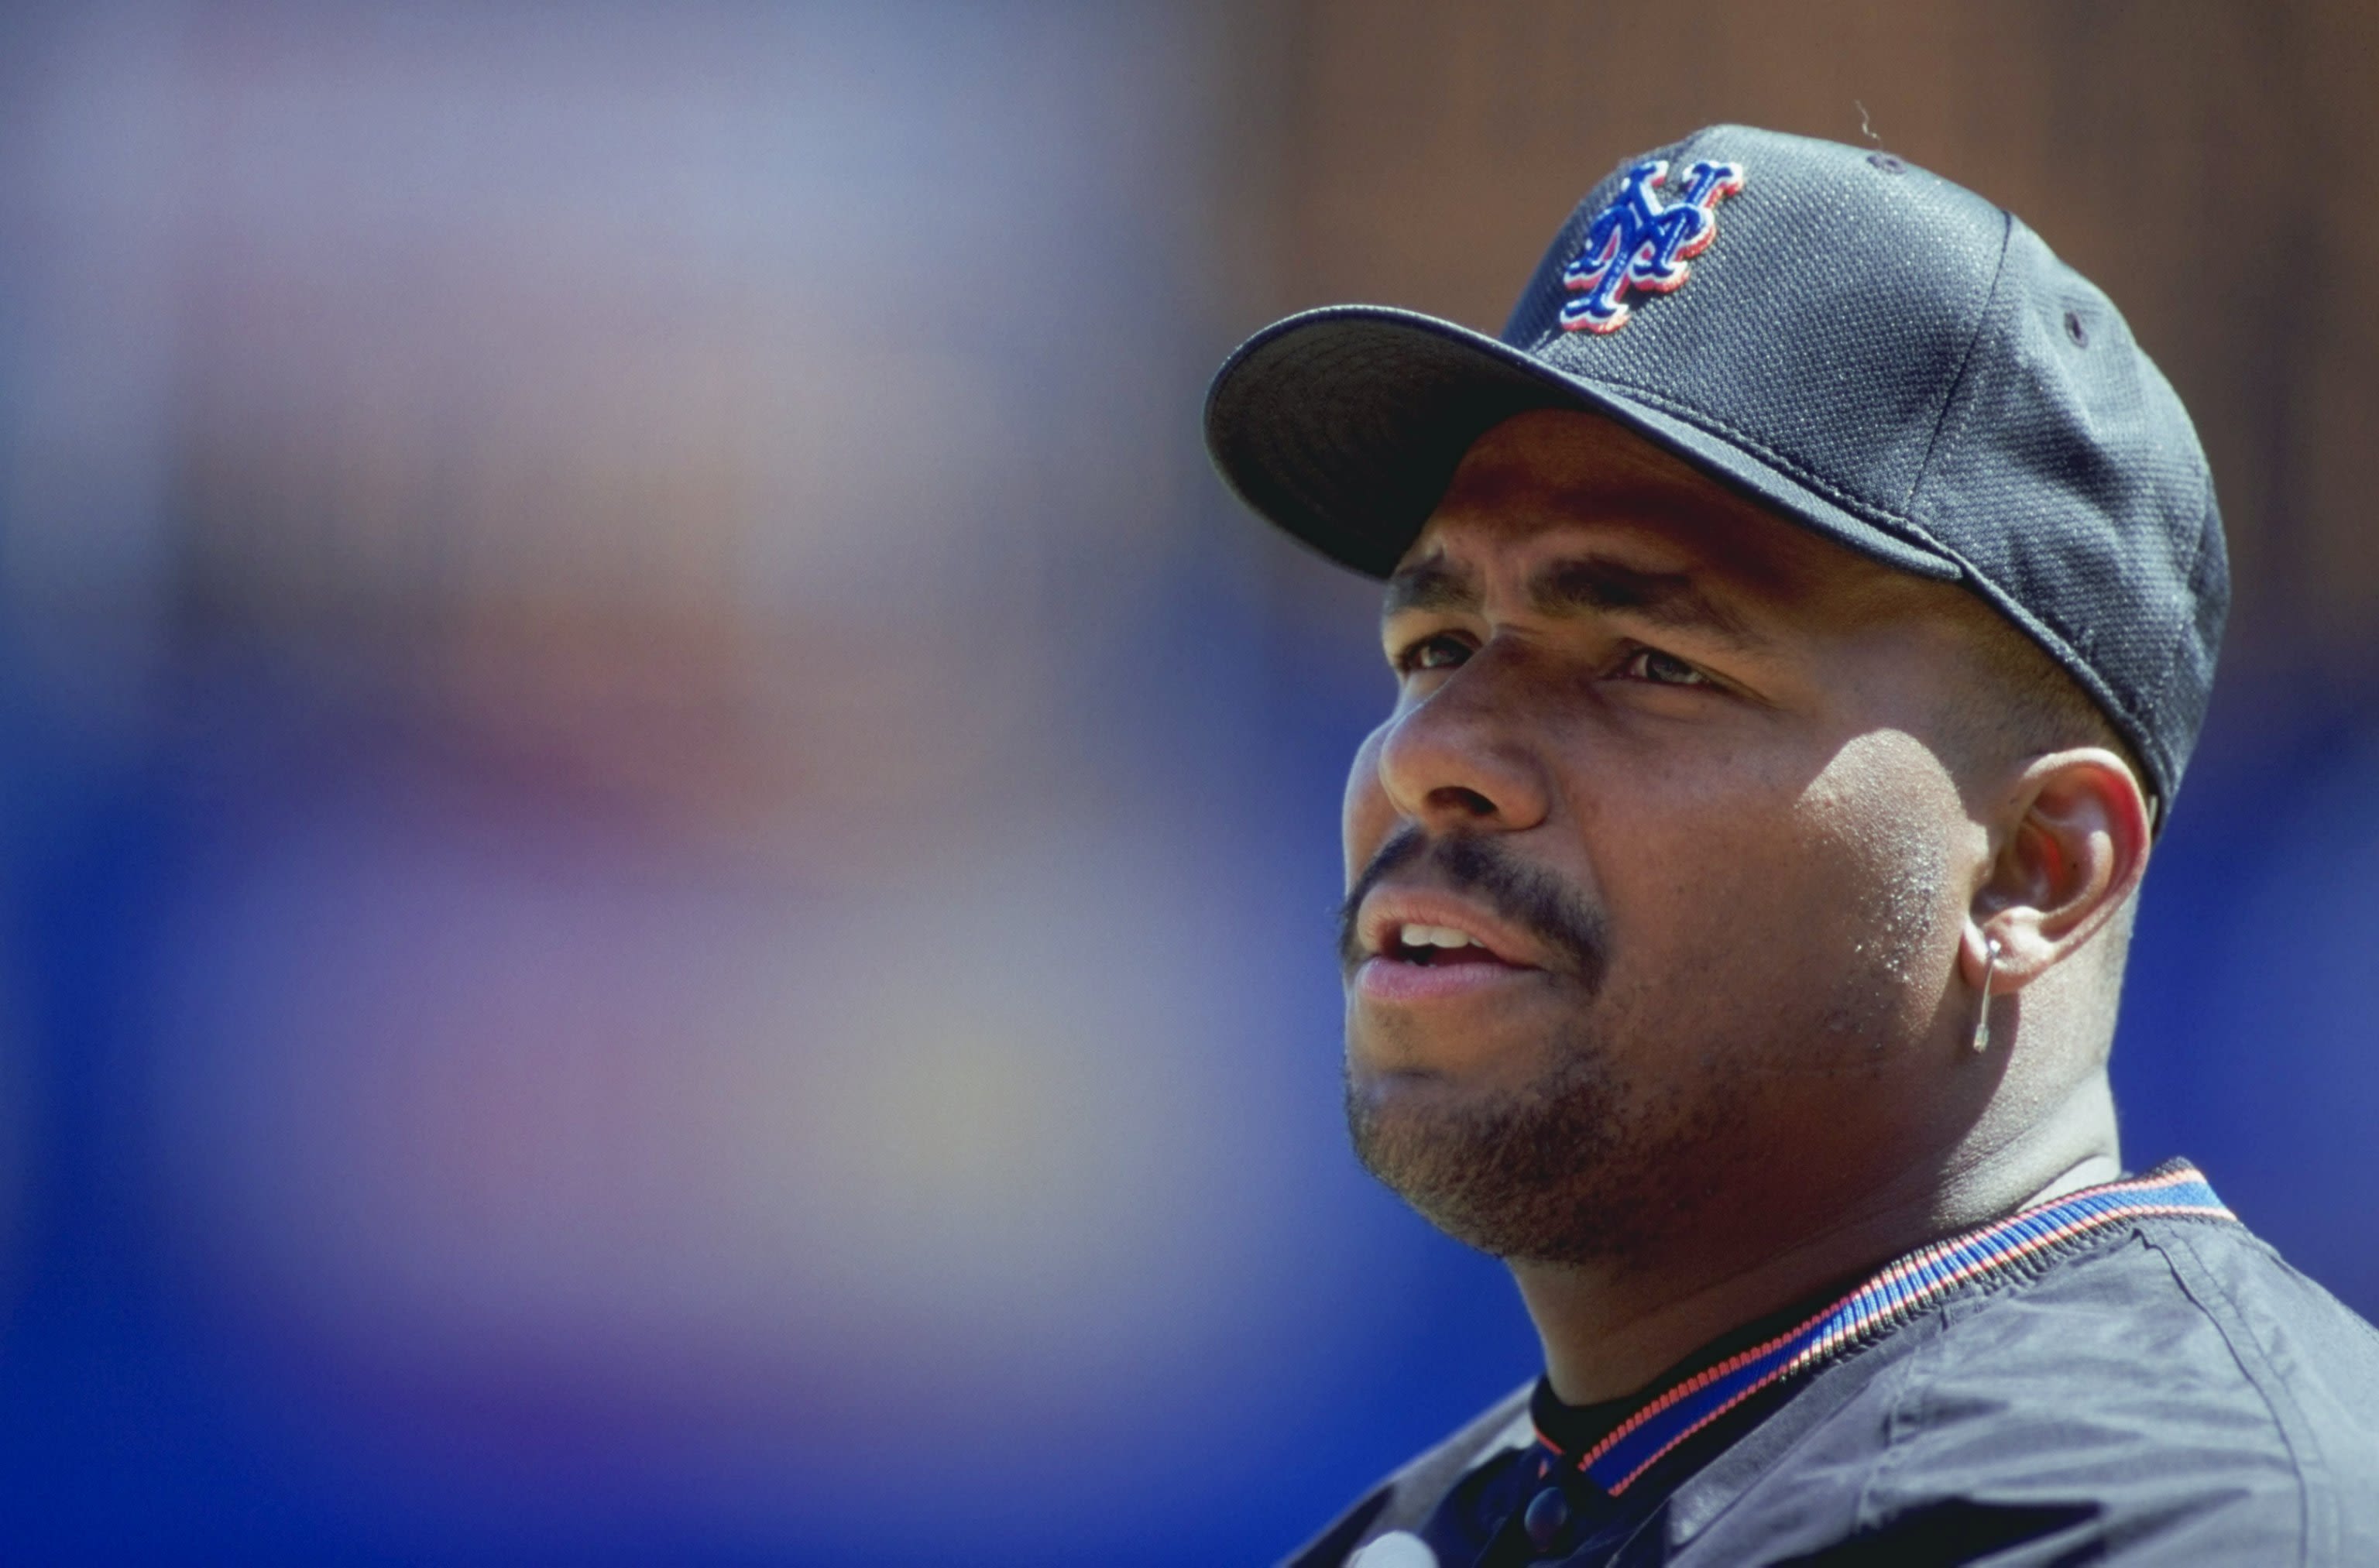 Bobby Bonilla Day: He hasn't played in MLB for more than two